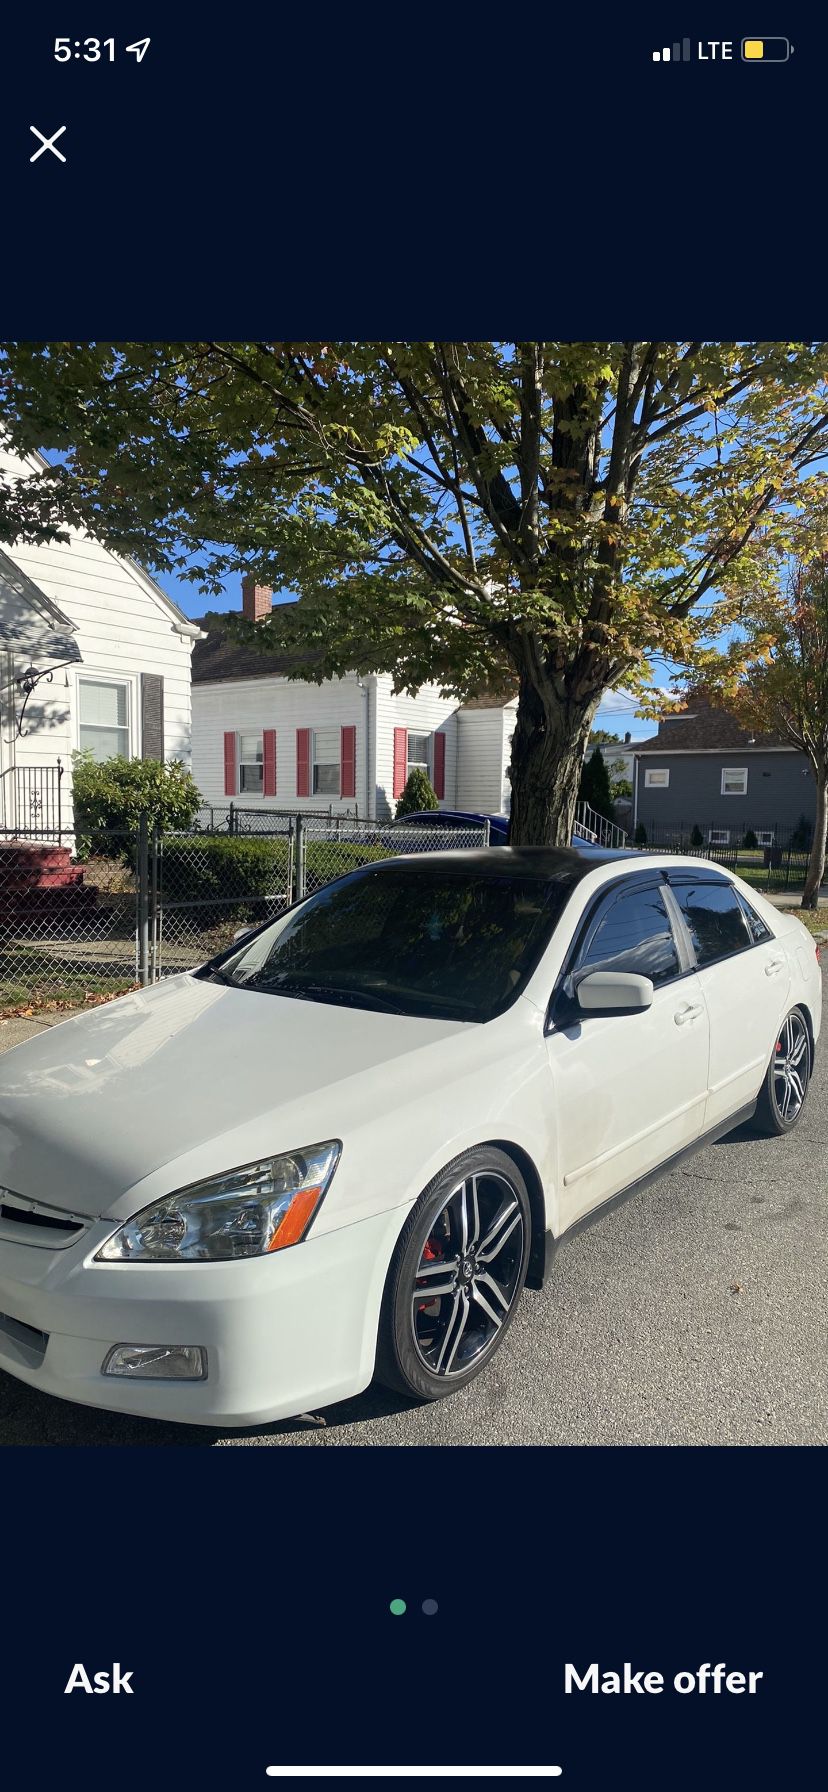 2003 Honda Accord for Sale in Providence, RI OfferUp